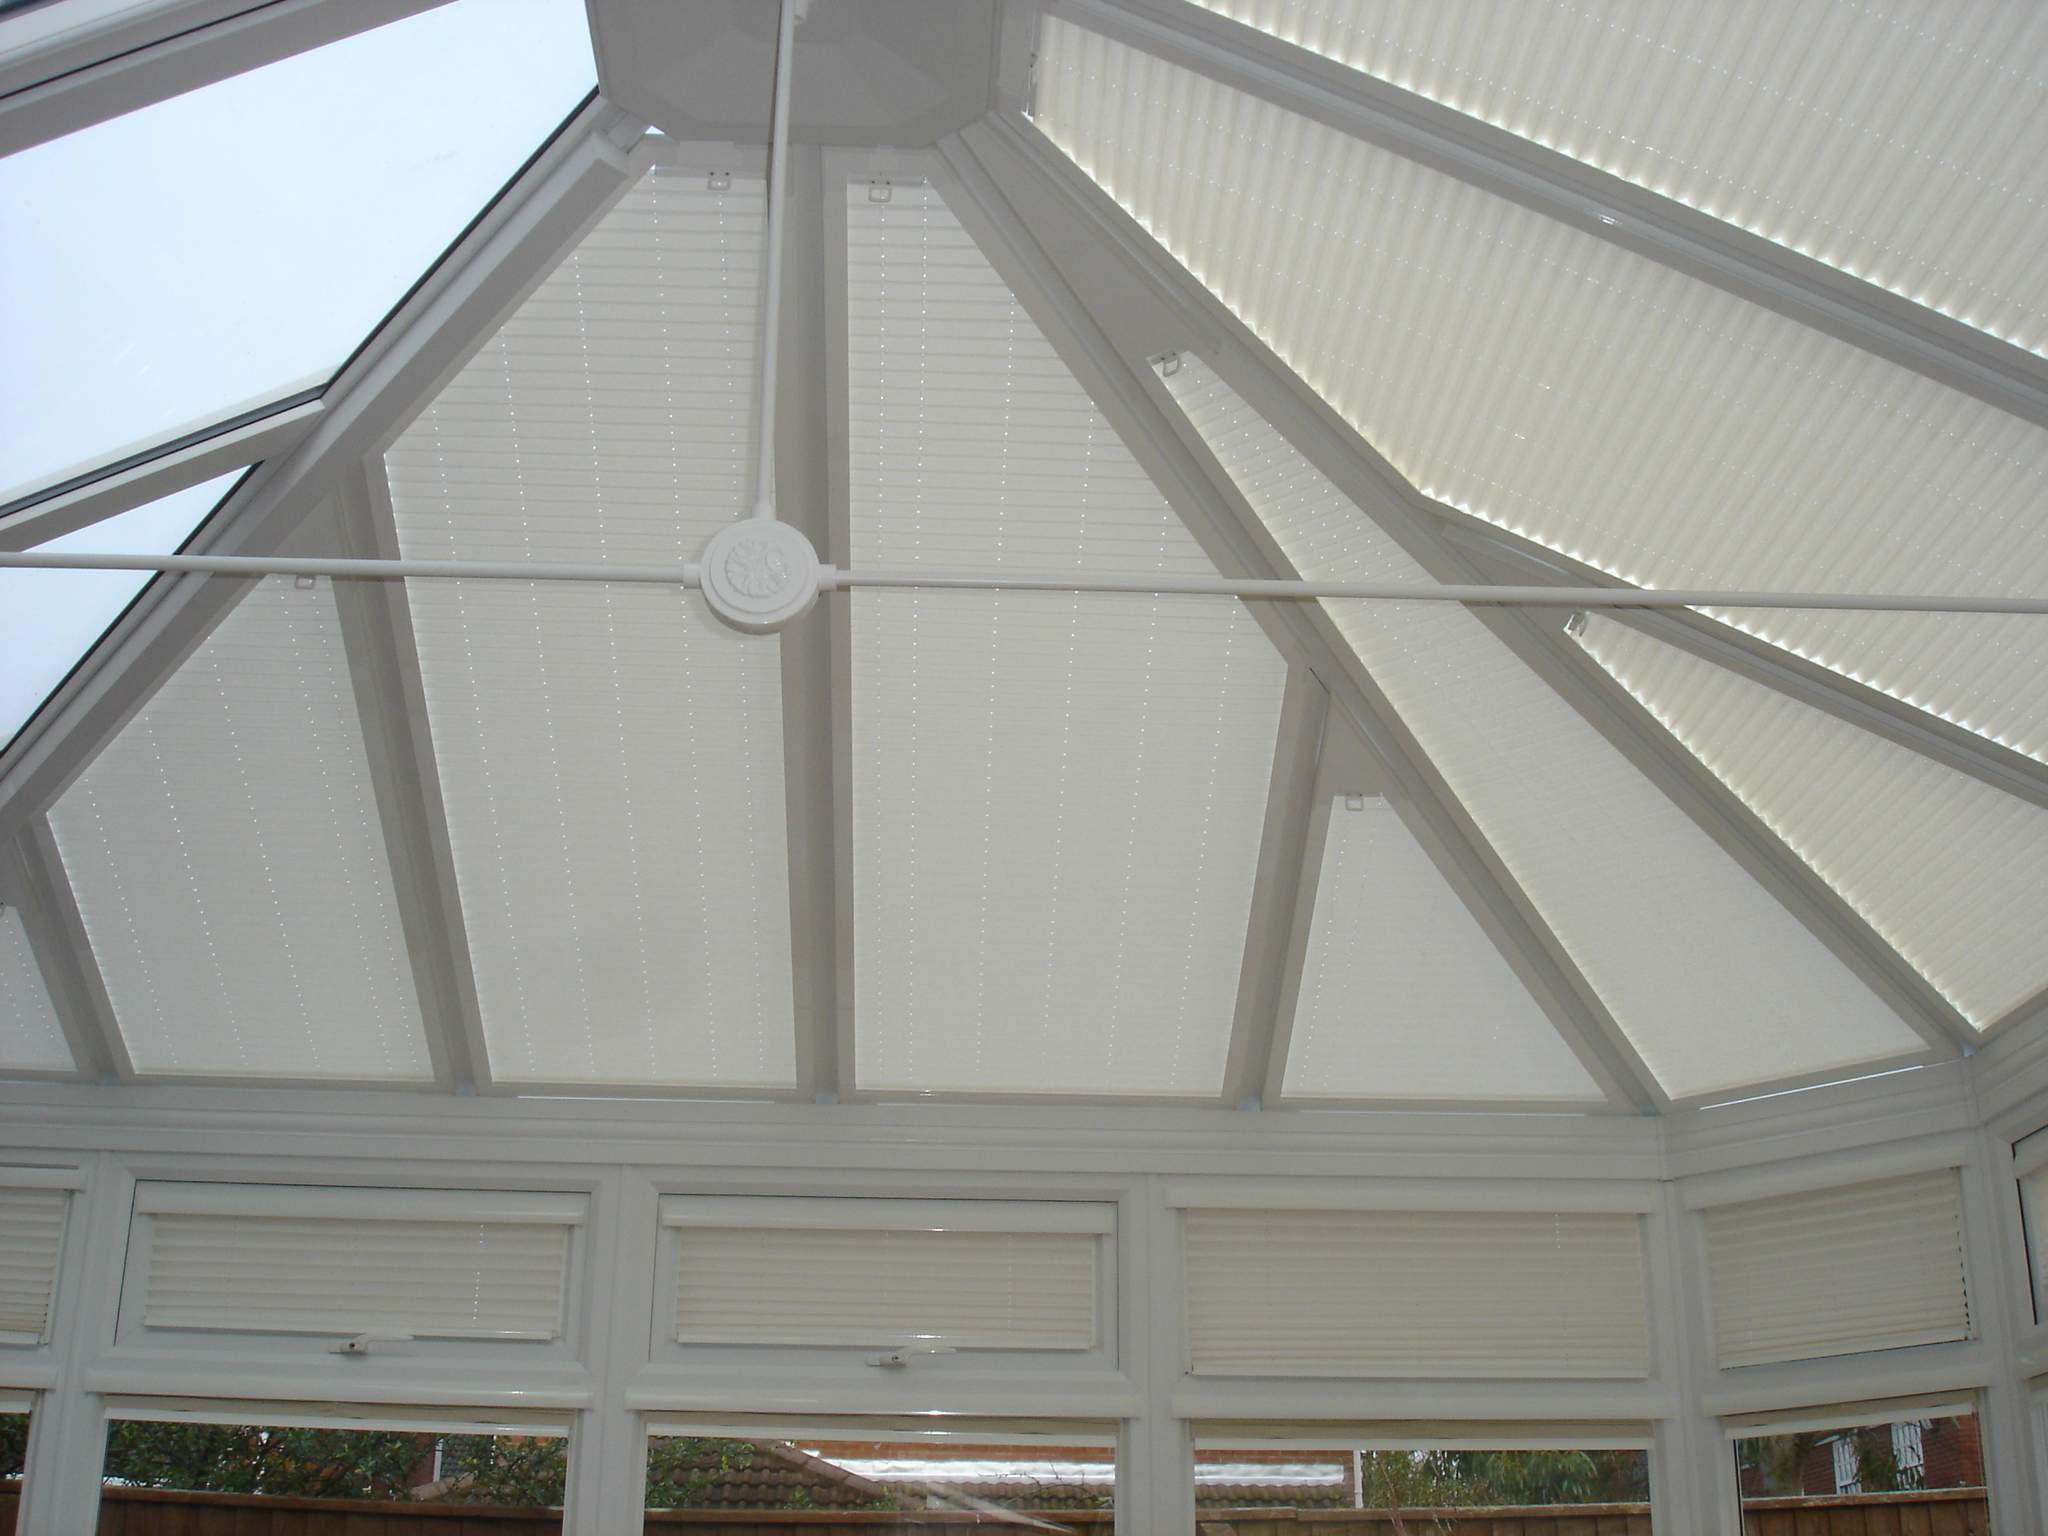 Get the Functionality of Conservatory Roof Blinds for your conservatory